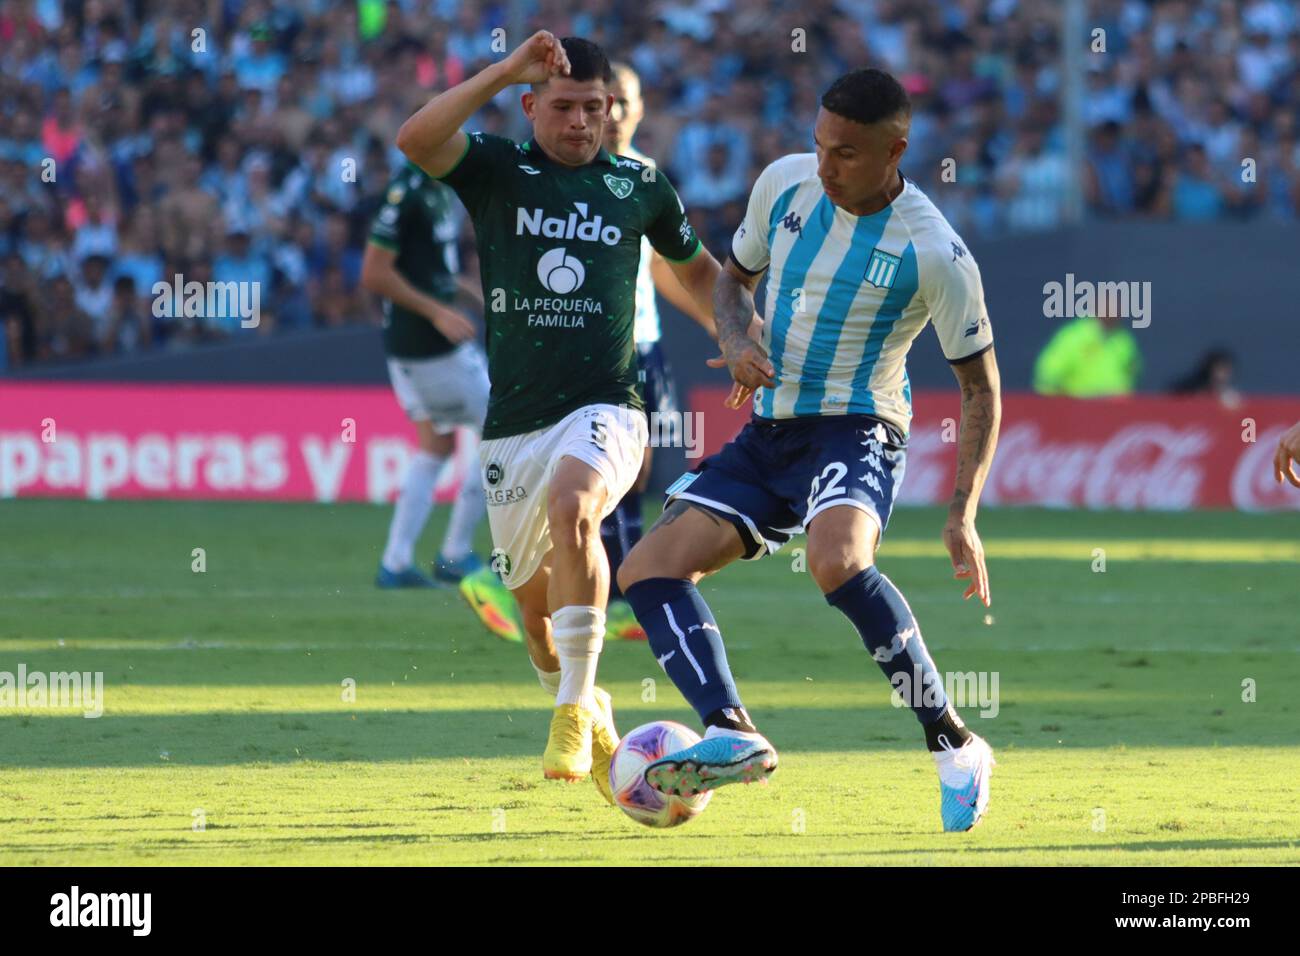 Avellaneda, Argentina, 12, March, 2023. Paolo Guerrero from Racing Club  dribbles with the ball during the match between Racing Club vs. Club Atletico Sarmiento, match 7, Professional Soccer League of Argentina 2023 (Liga Profesional de Futbol 2023 - Torneo Binance). Credit: Fabideciria. Stock Photo